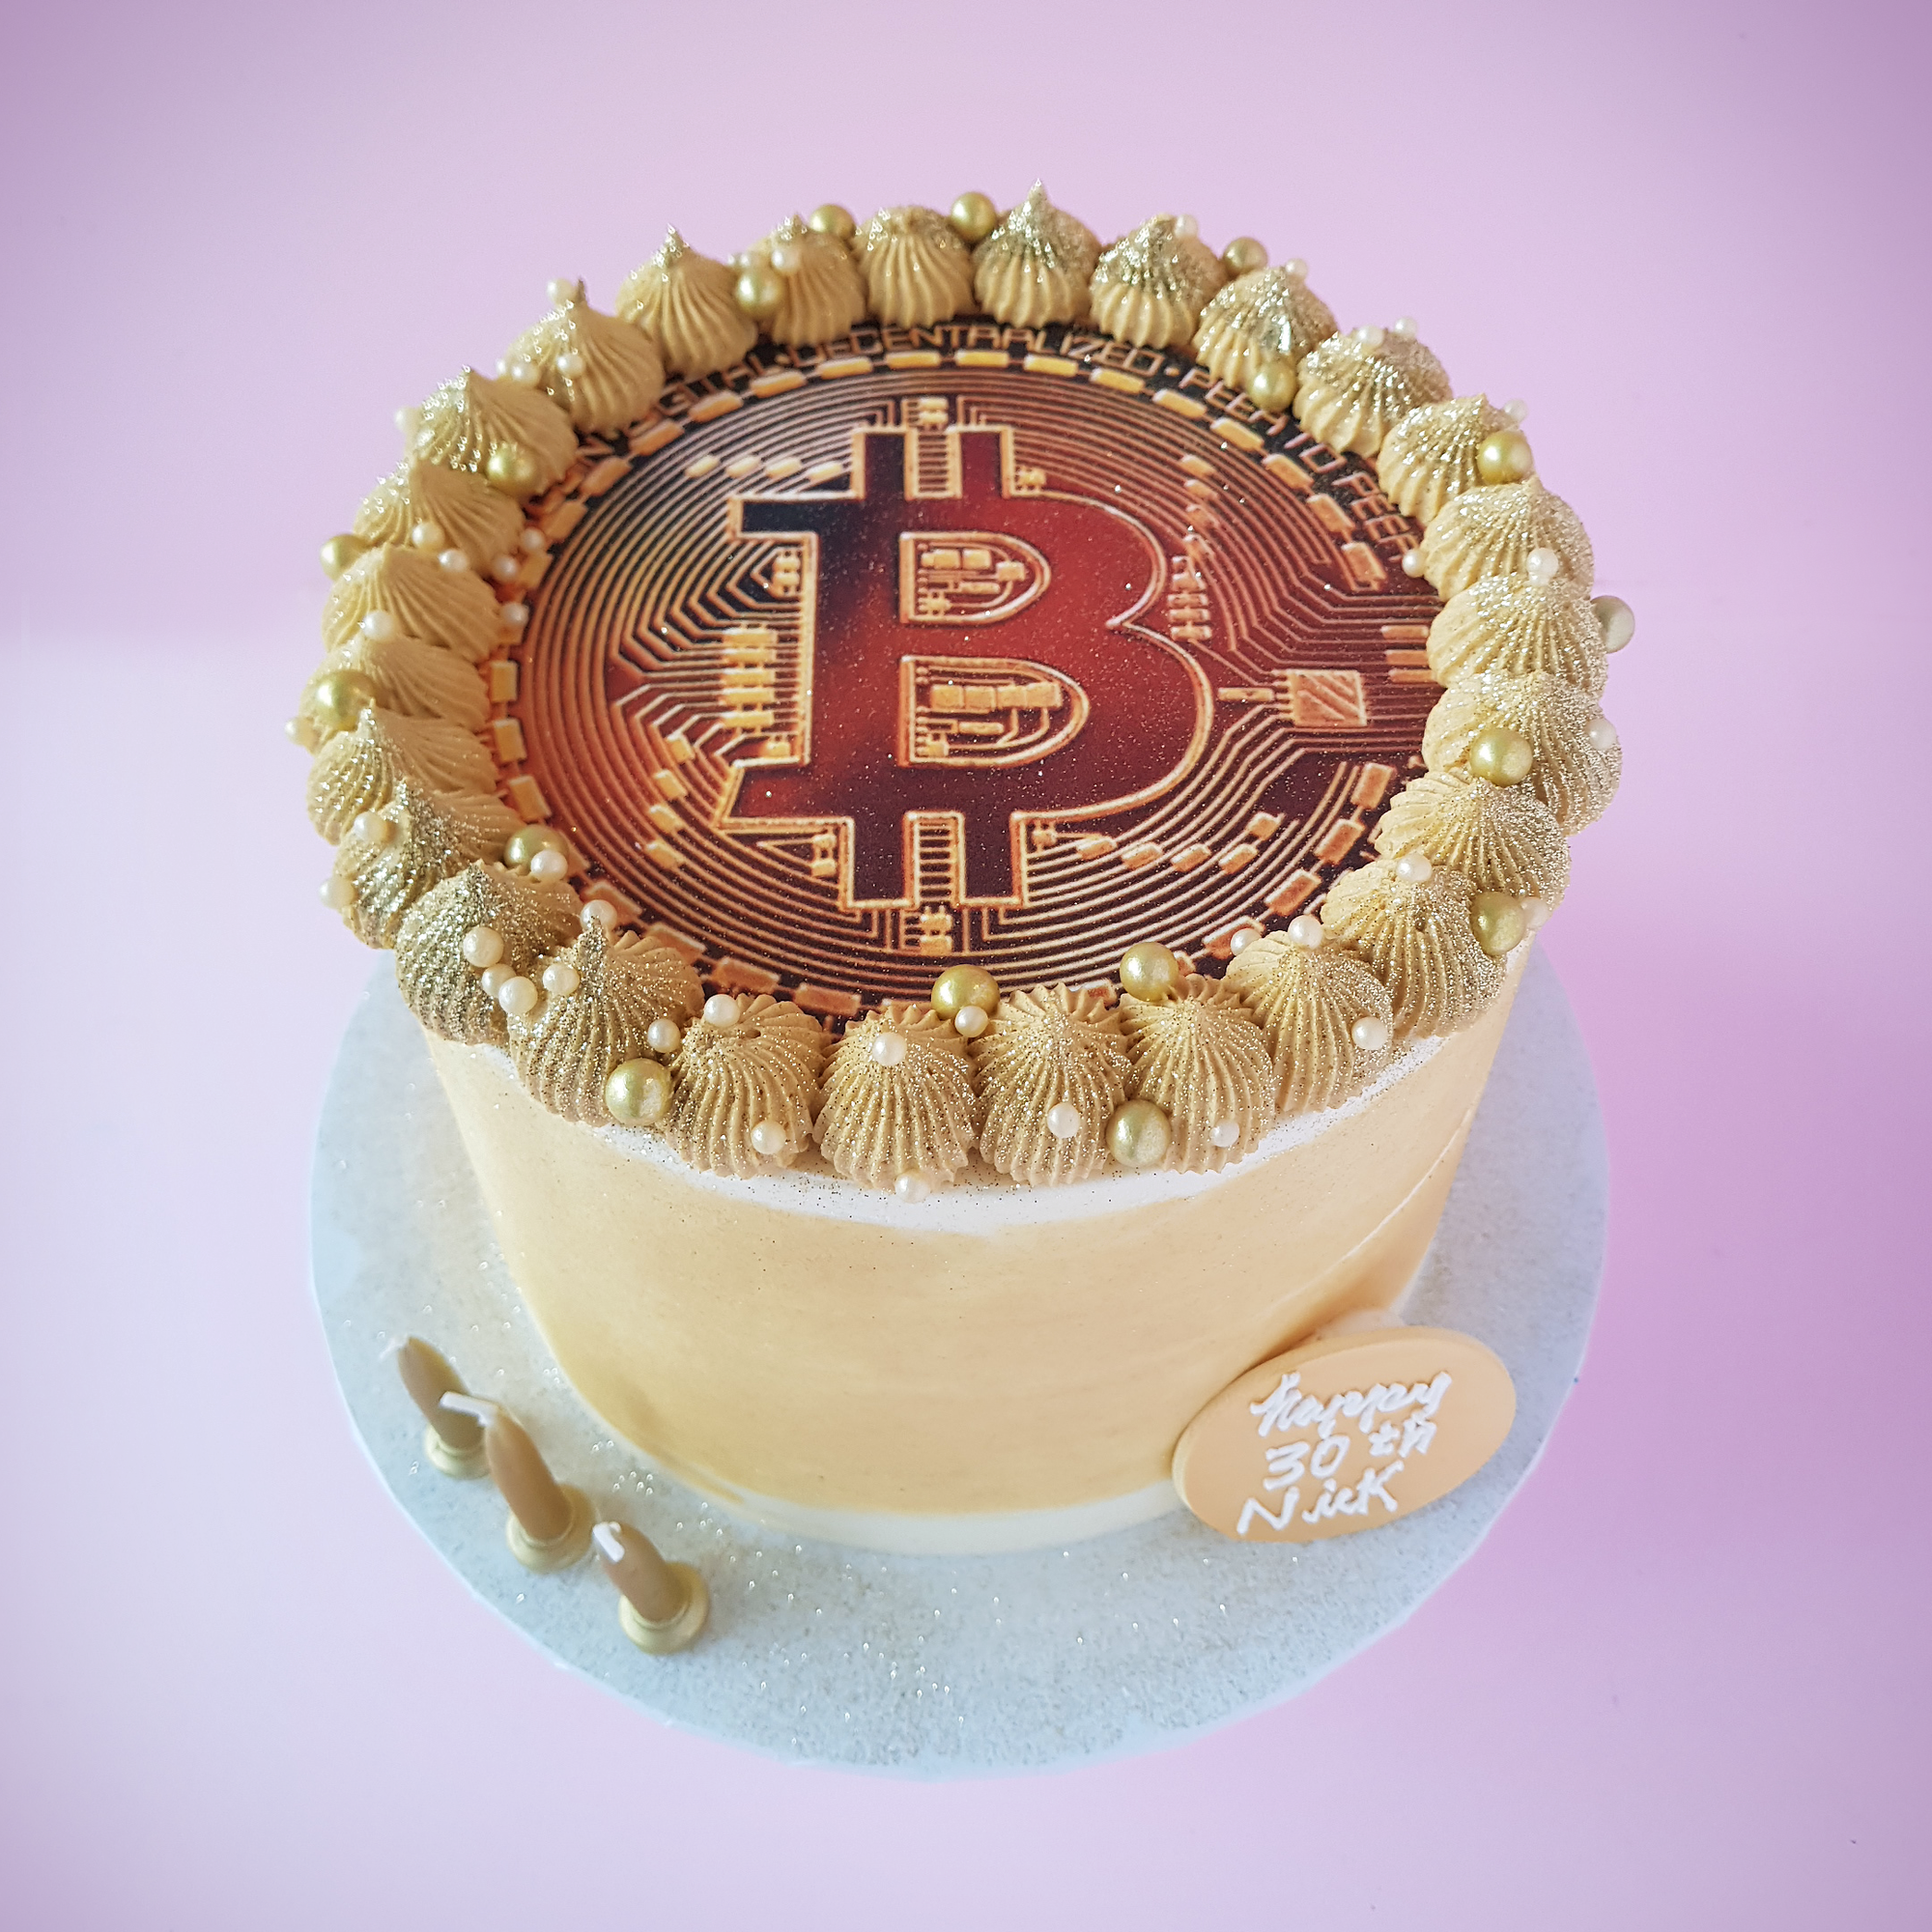 Cryptocurrency Bitcoin Cake Design - Auction gavel and ...